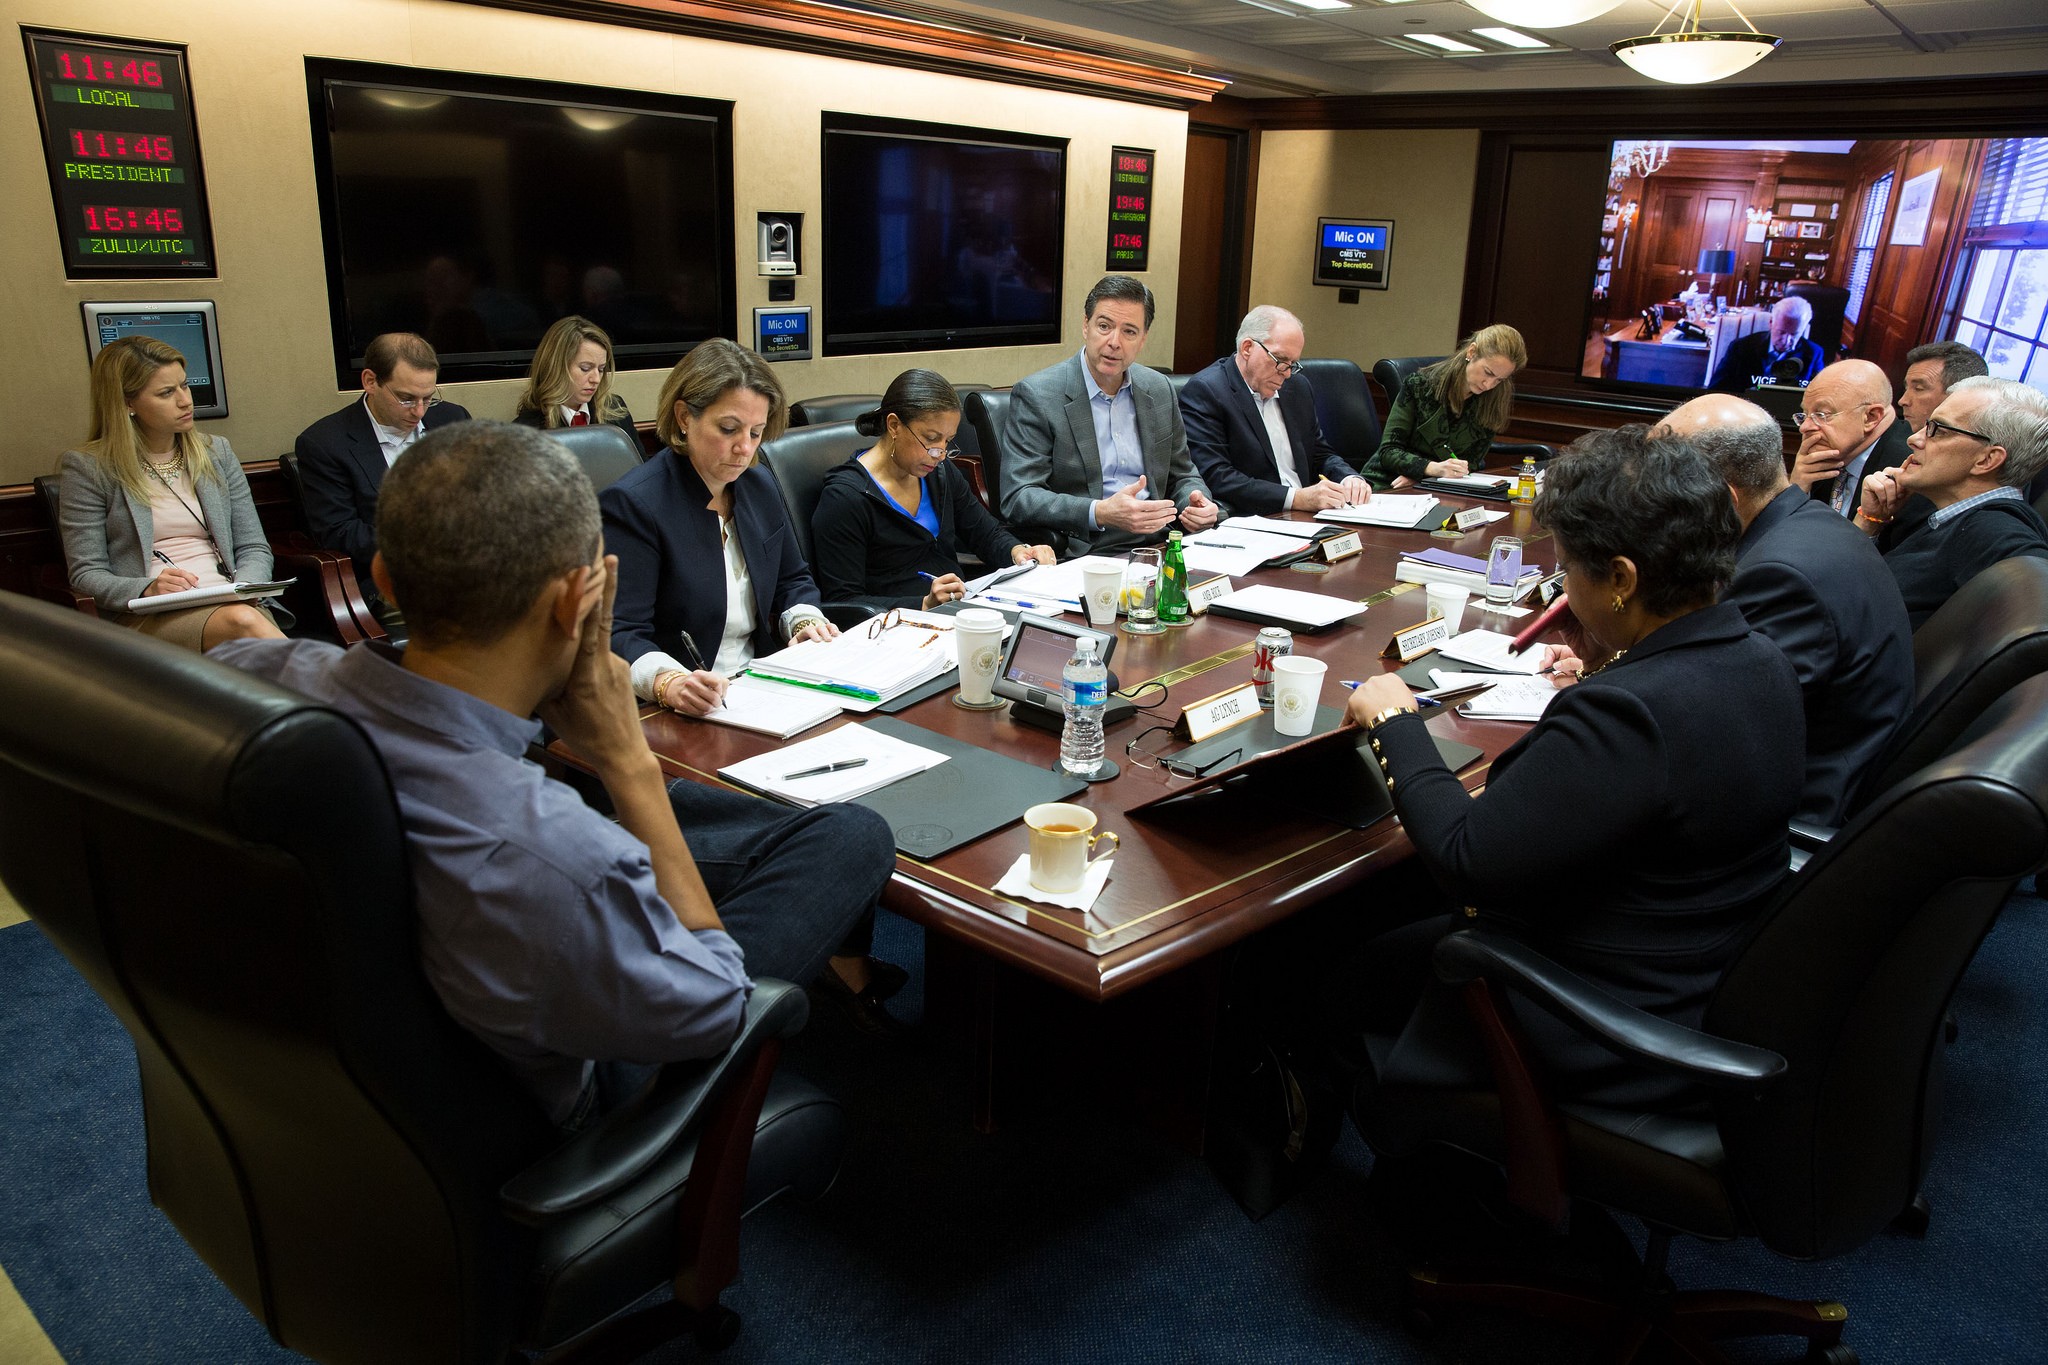 The White House Situation Room Clocks Are Rather Interesting